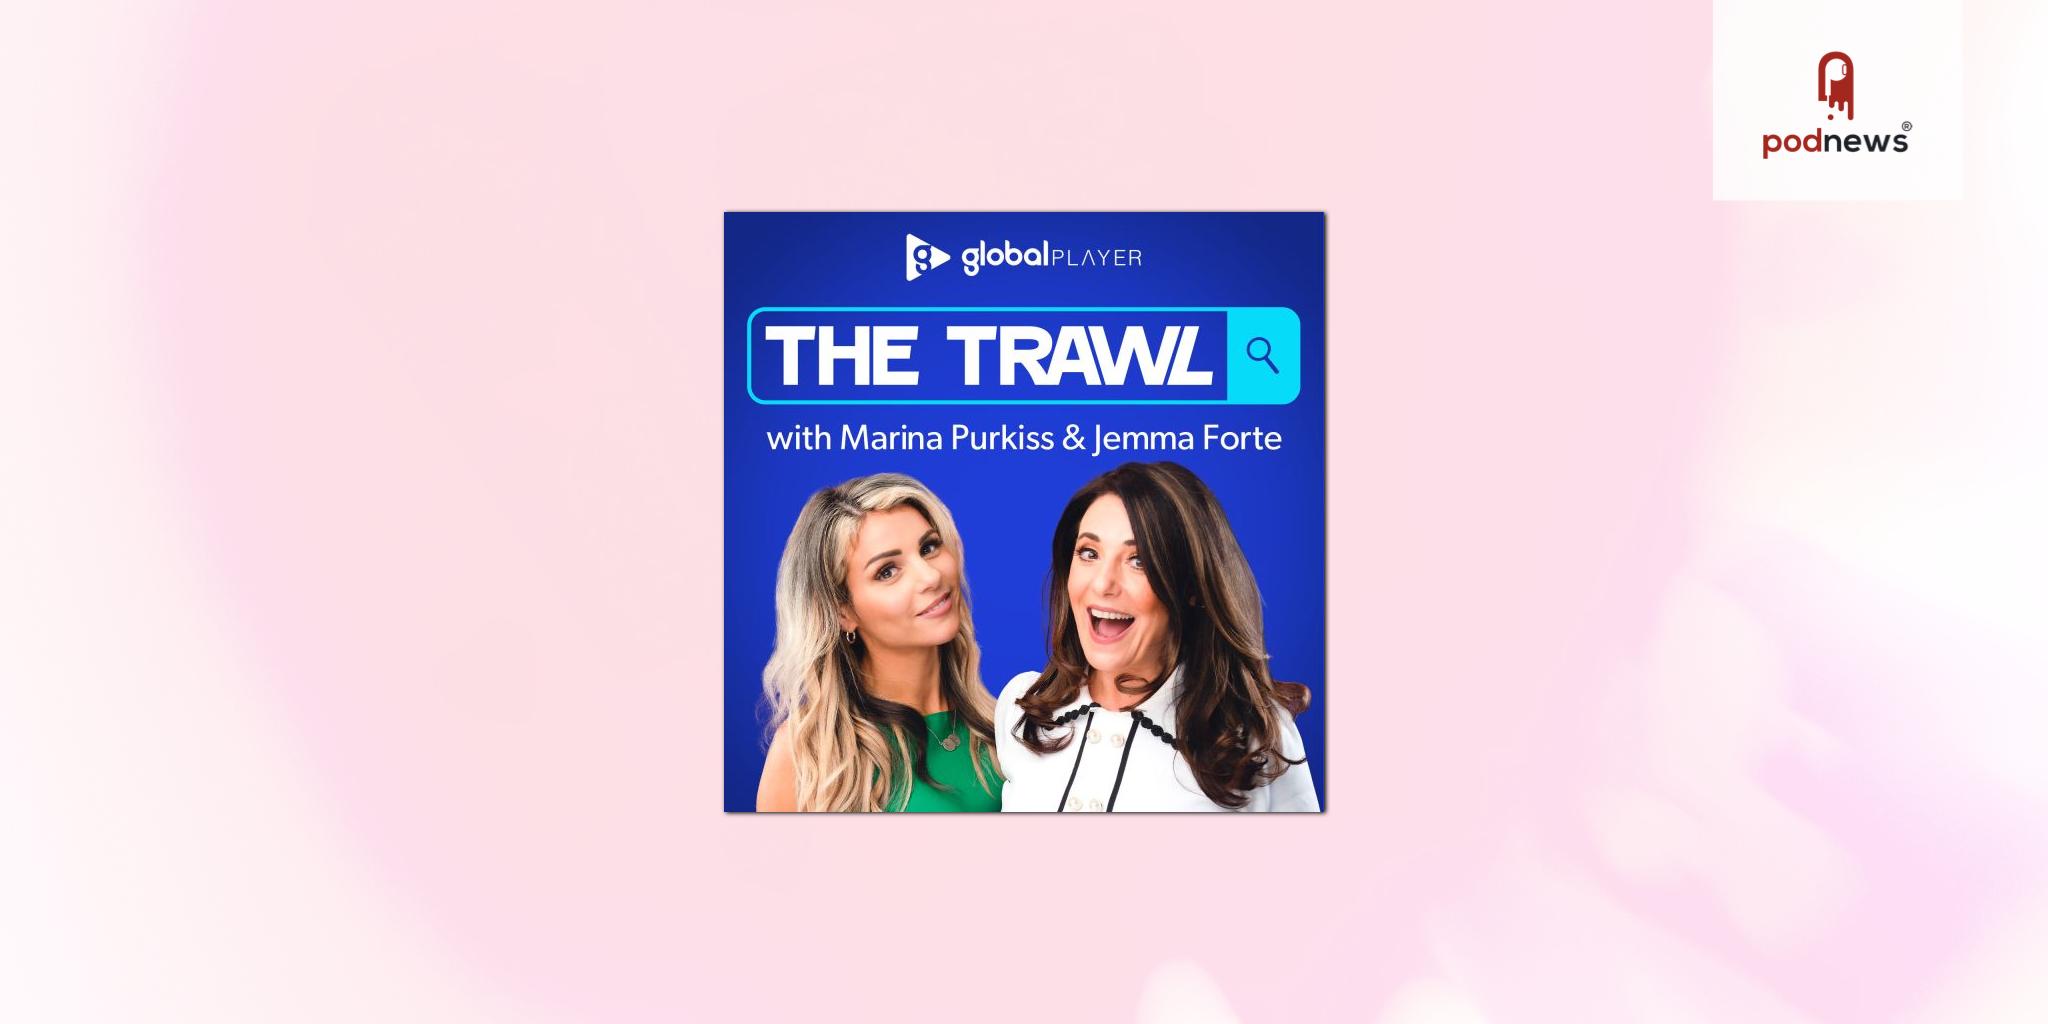 Global acquires popular political podcast The Trawl